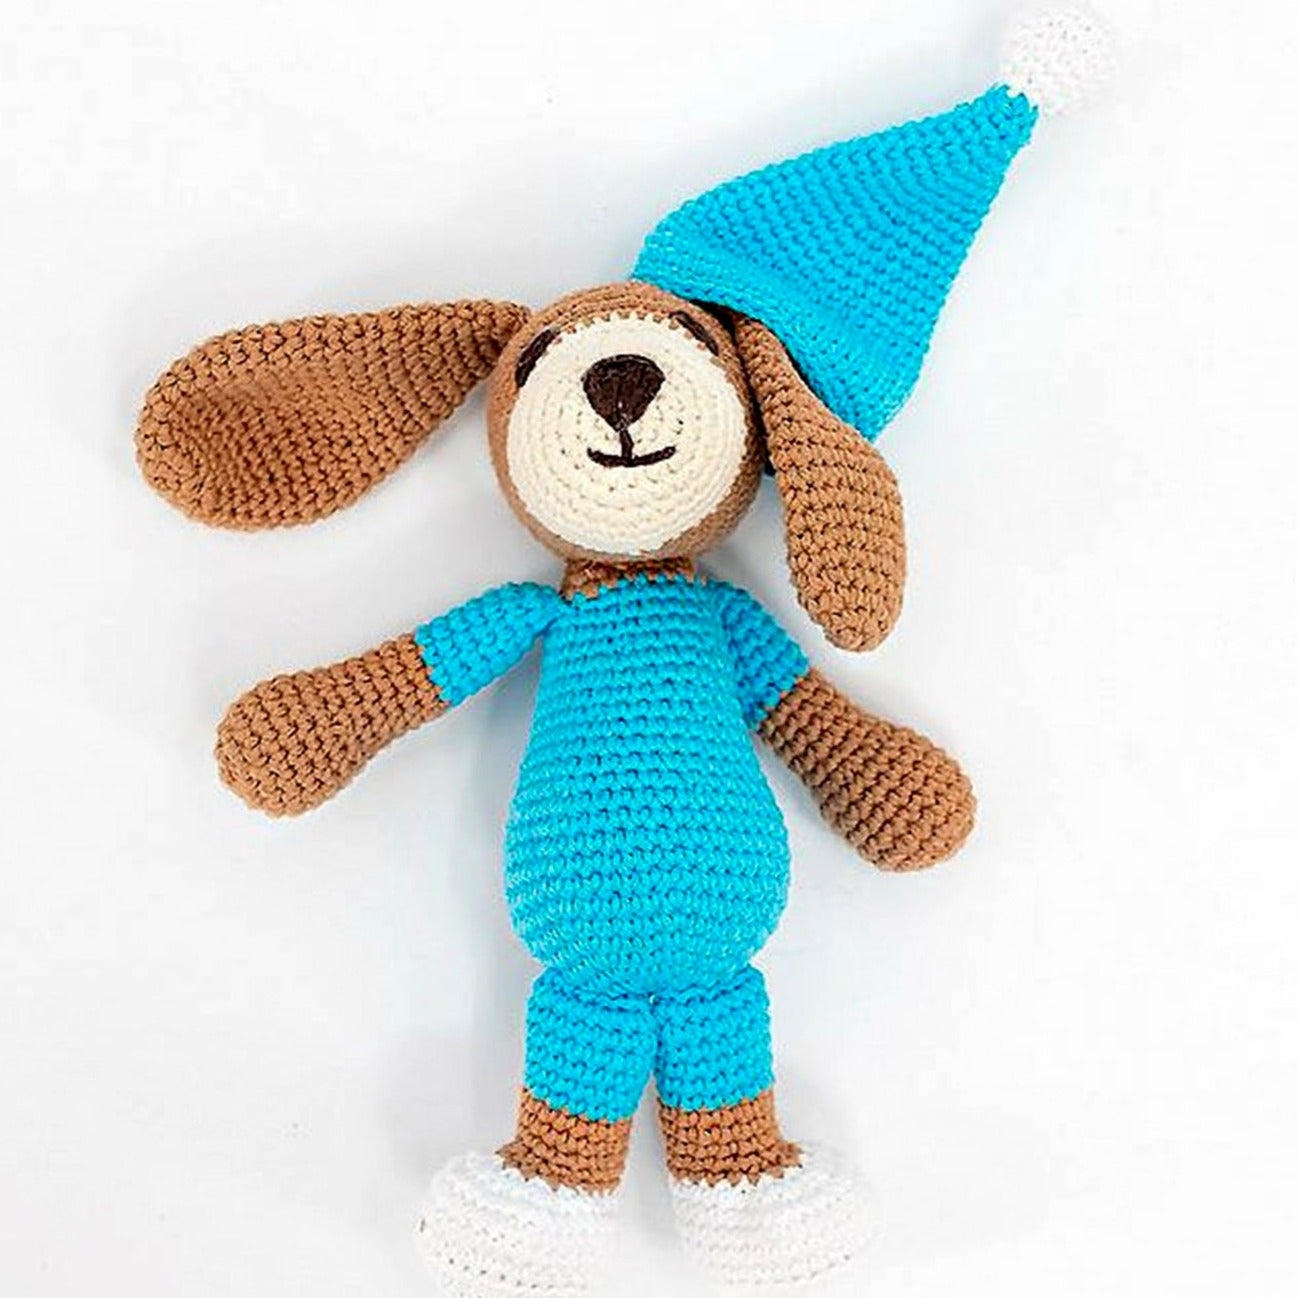 Crafted with precision using 100% organic hypoallergenic cotton, the Blue Doggie Crochet Toy is an ideal baby gift.